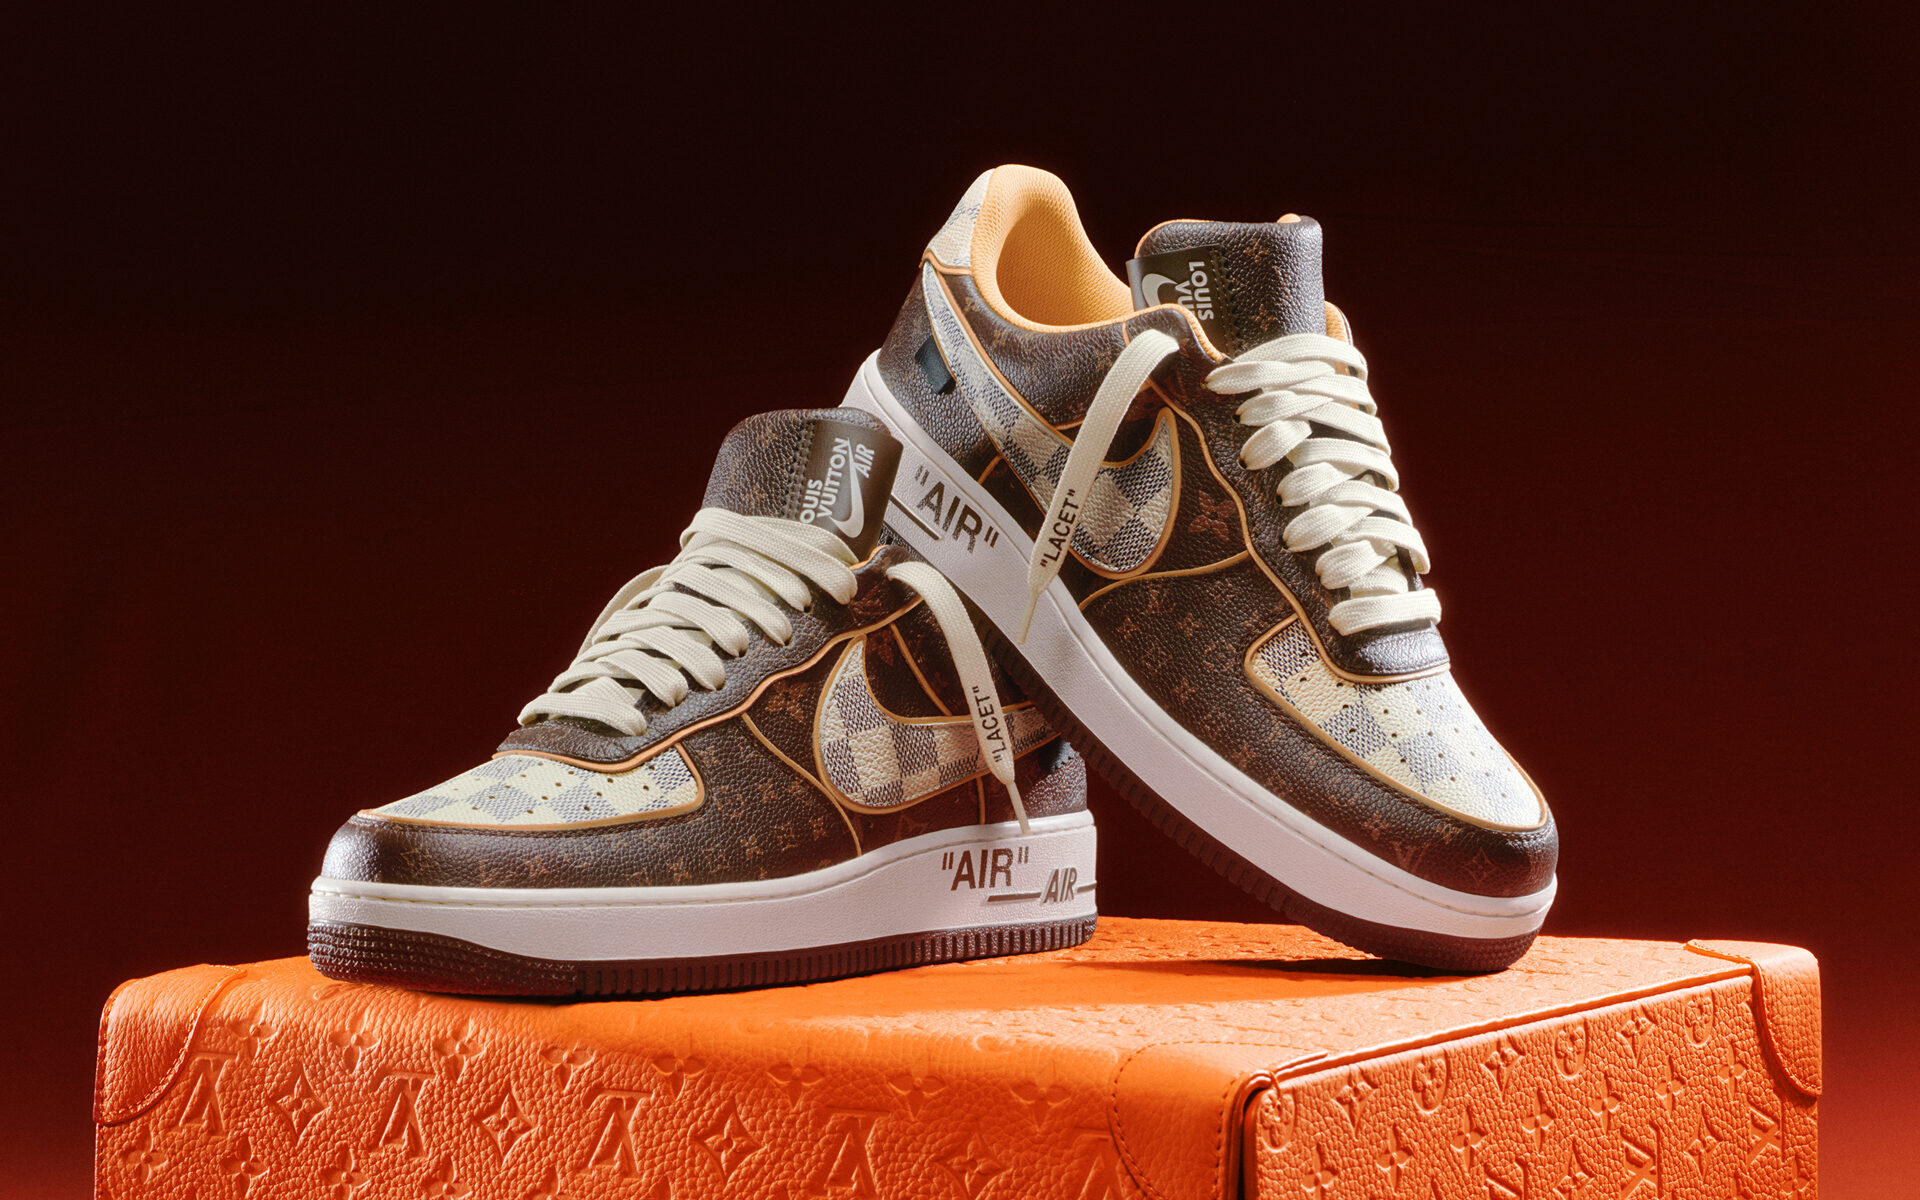 Sotheby's Auction Achieves $25.3 Million in Sale of 200 Pairs of Louis  Vuitton Virgil Abloh-designed Air Force 1s - Galerie